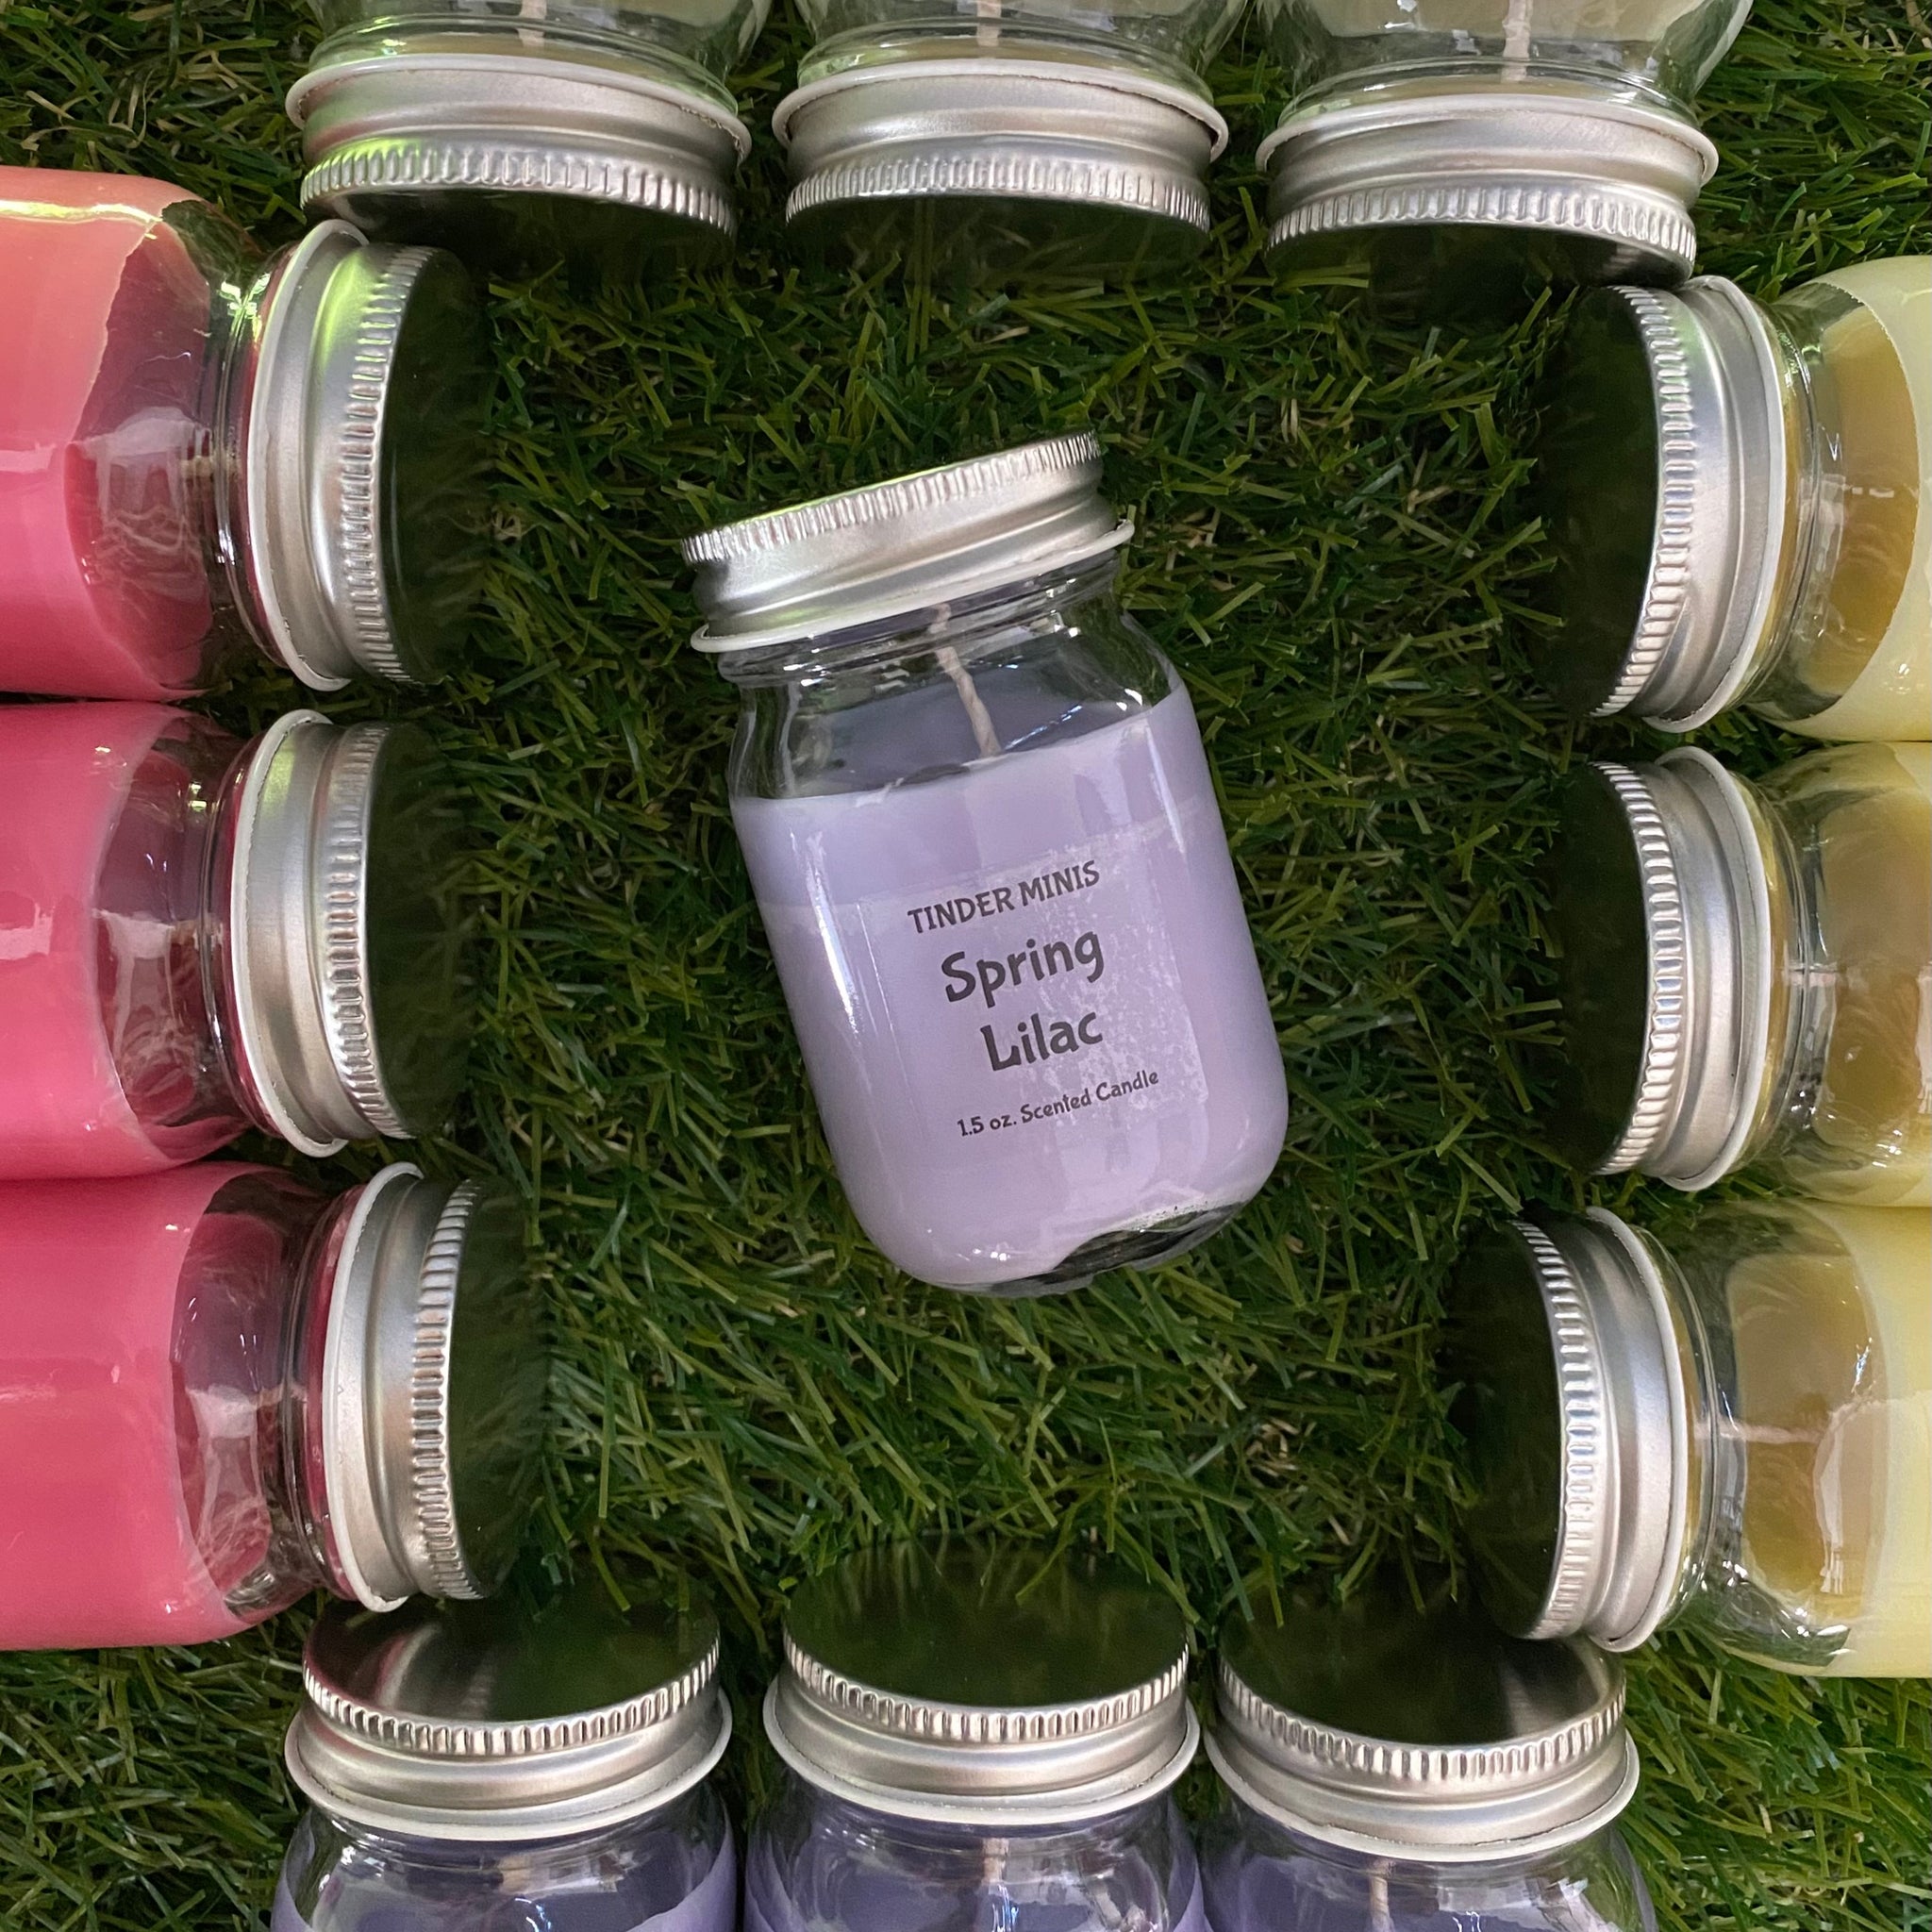 Spring floral candles that are eco-friendly and natural